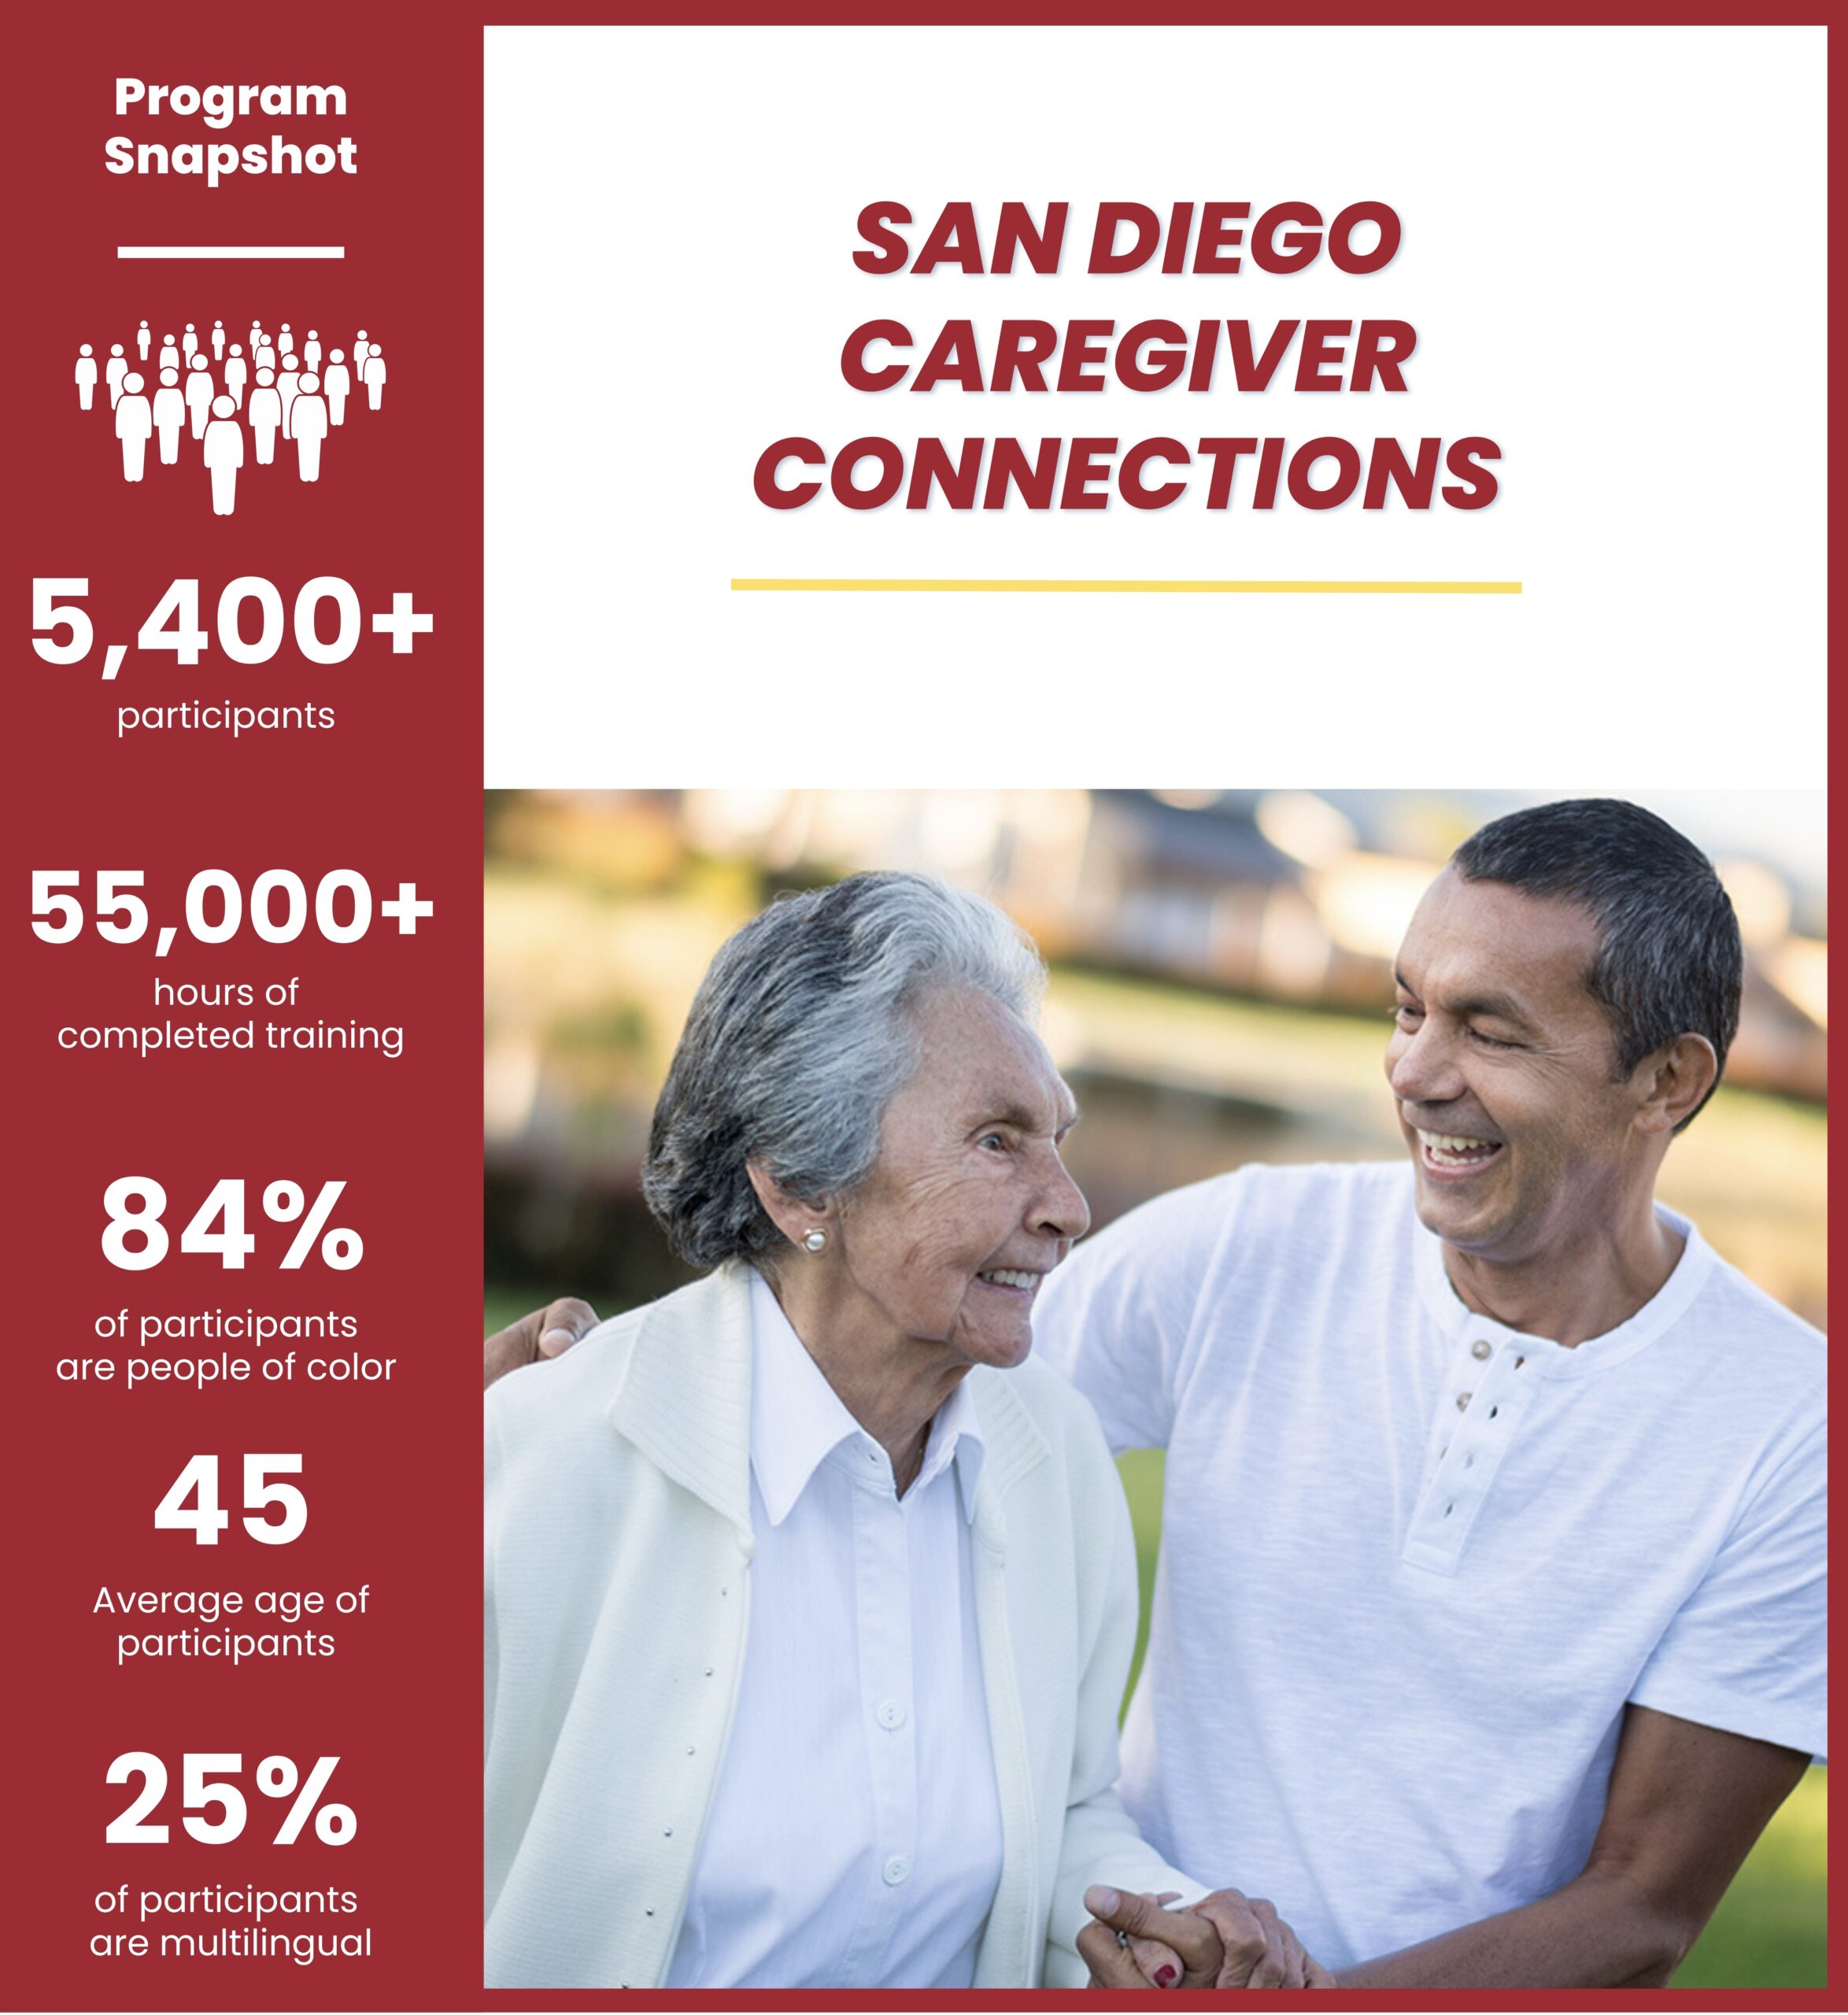 San Diego Care Giver Connections Info graphic